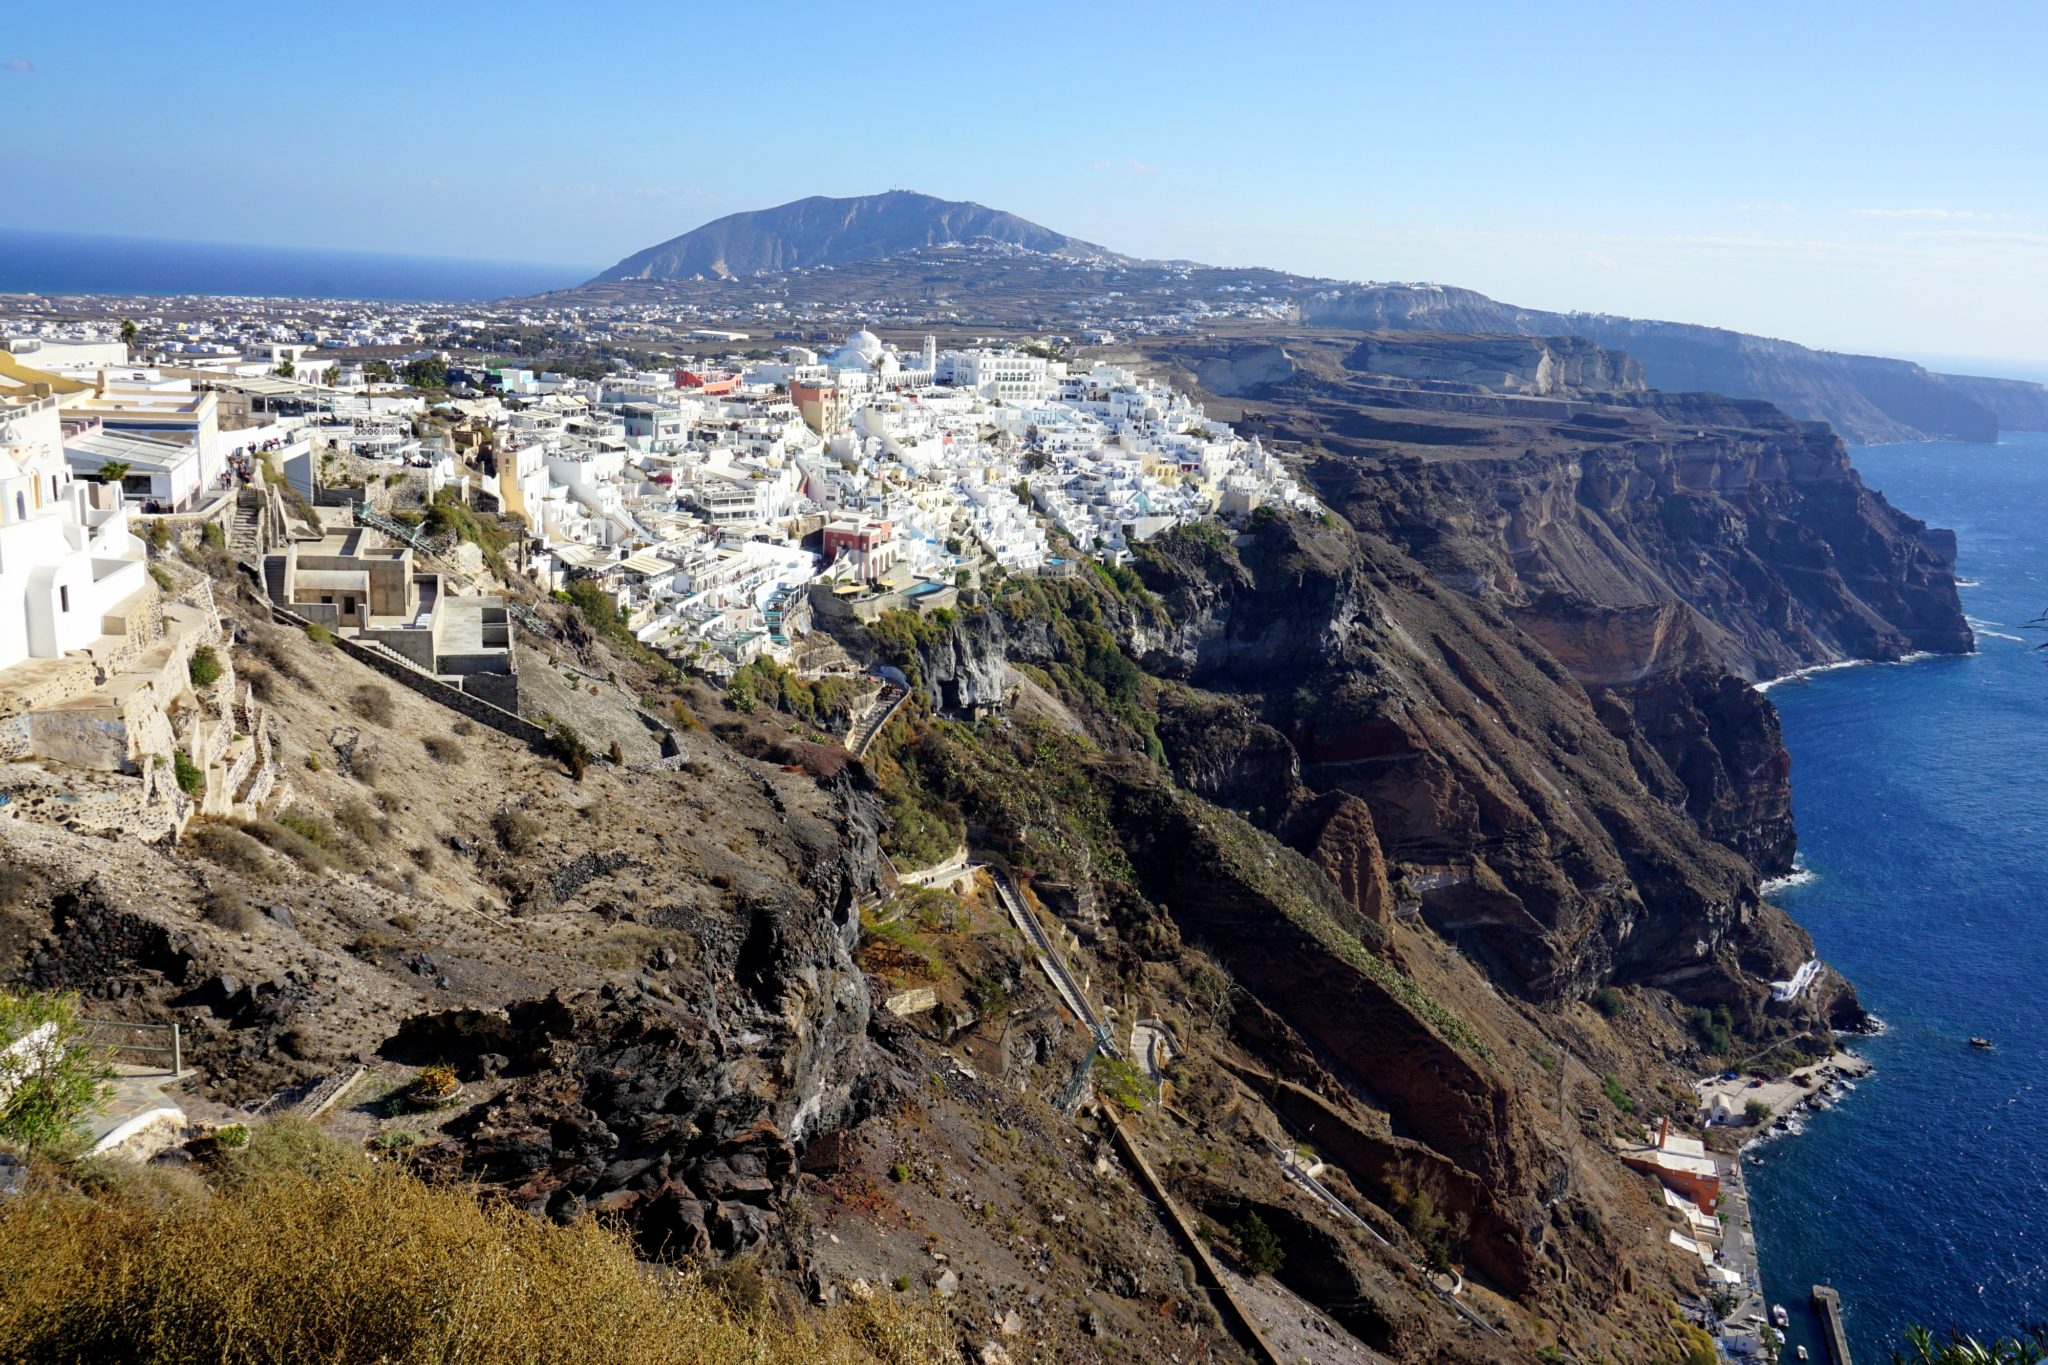 Fira perches on the caldera, the starting point of the hike.